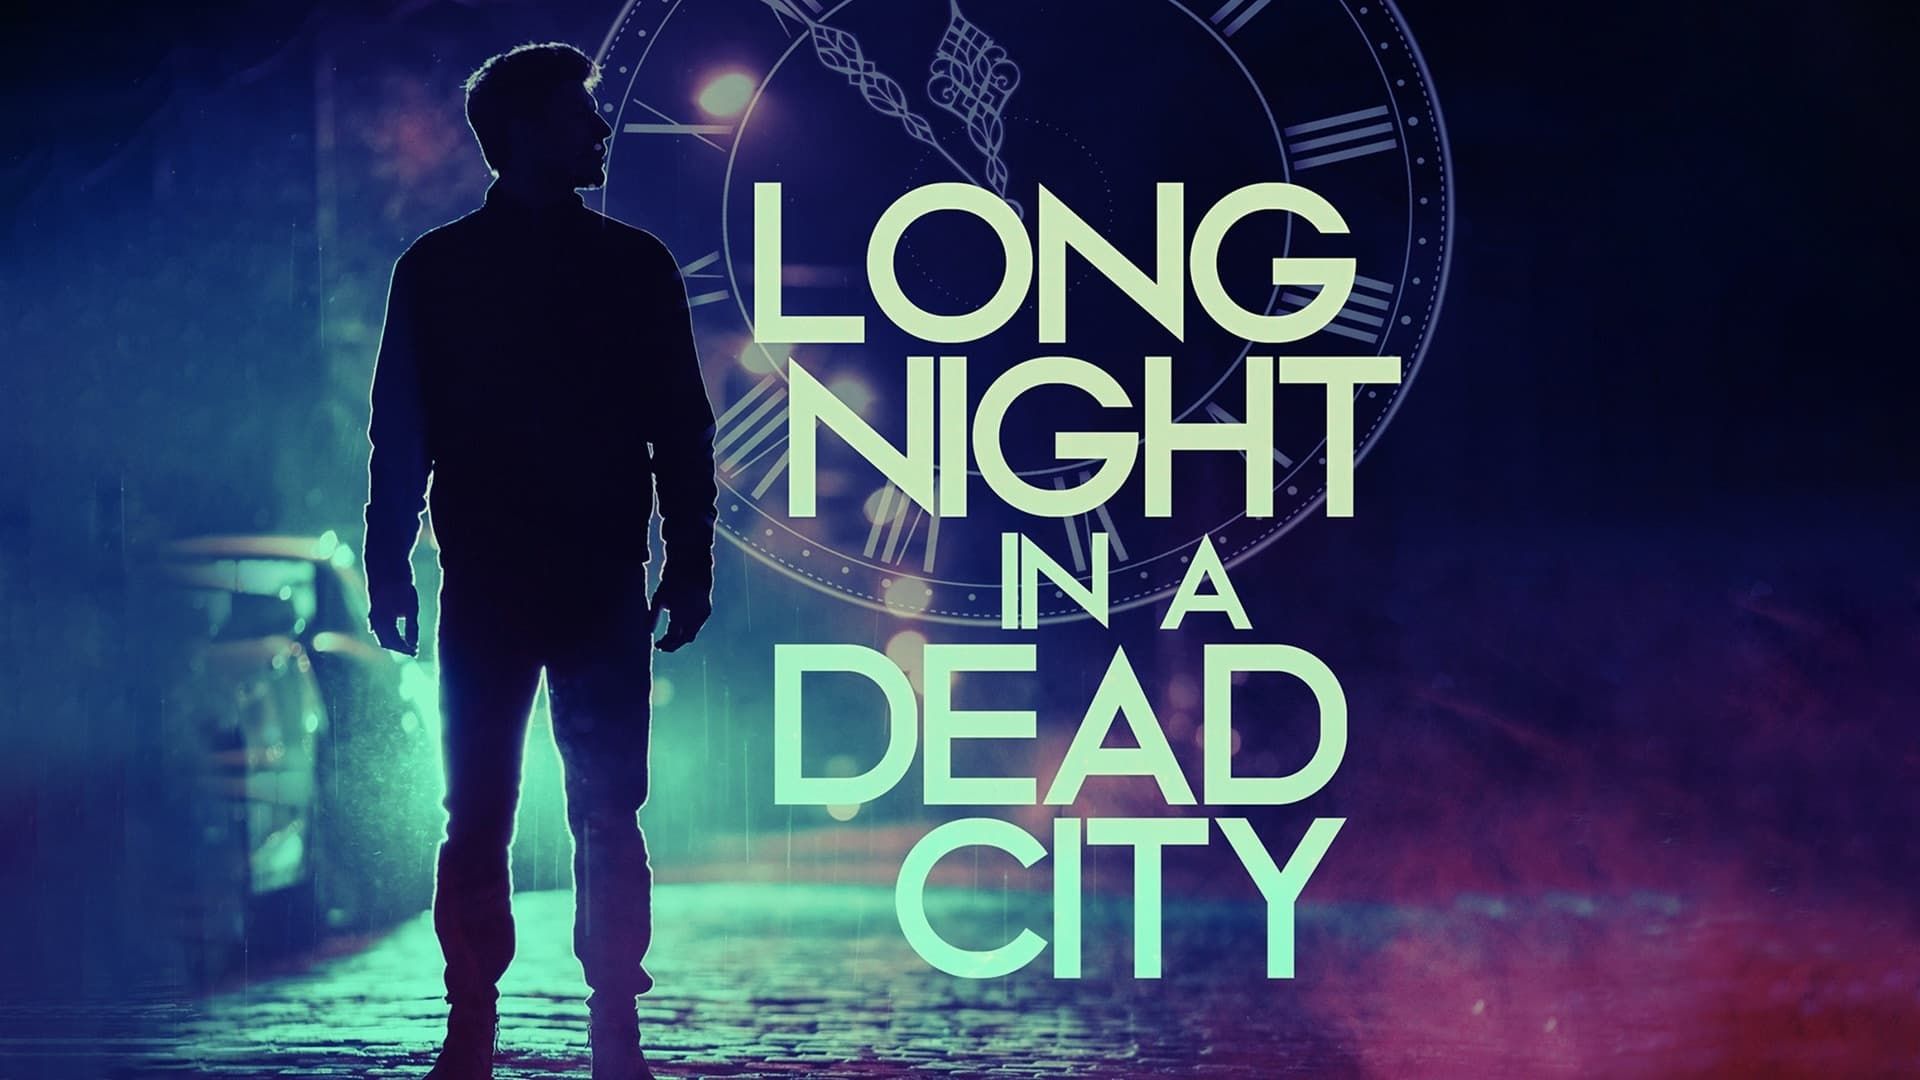 Long Night in a Dead City background